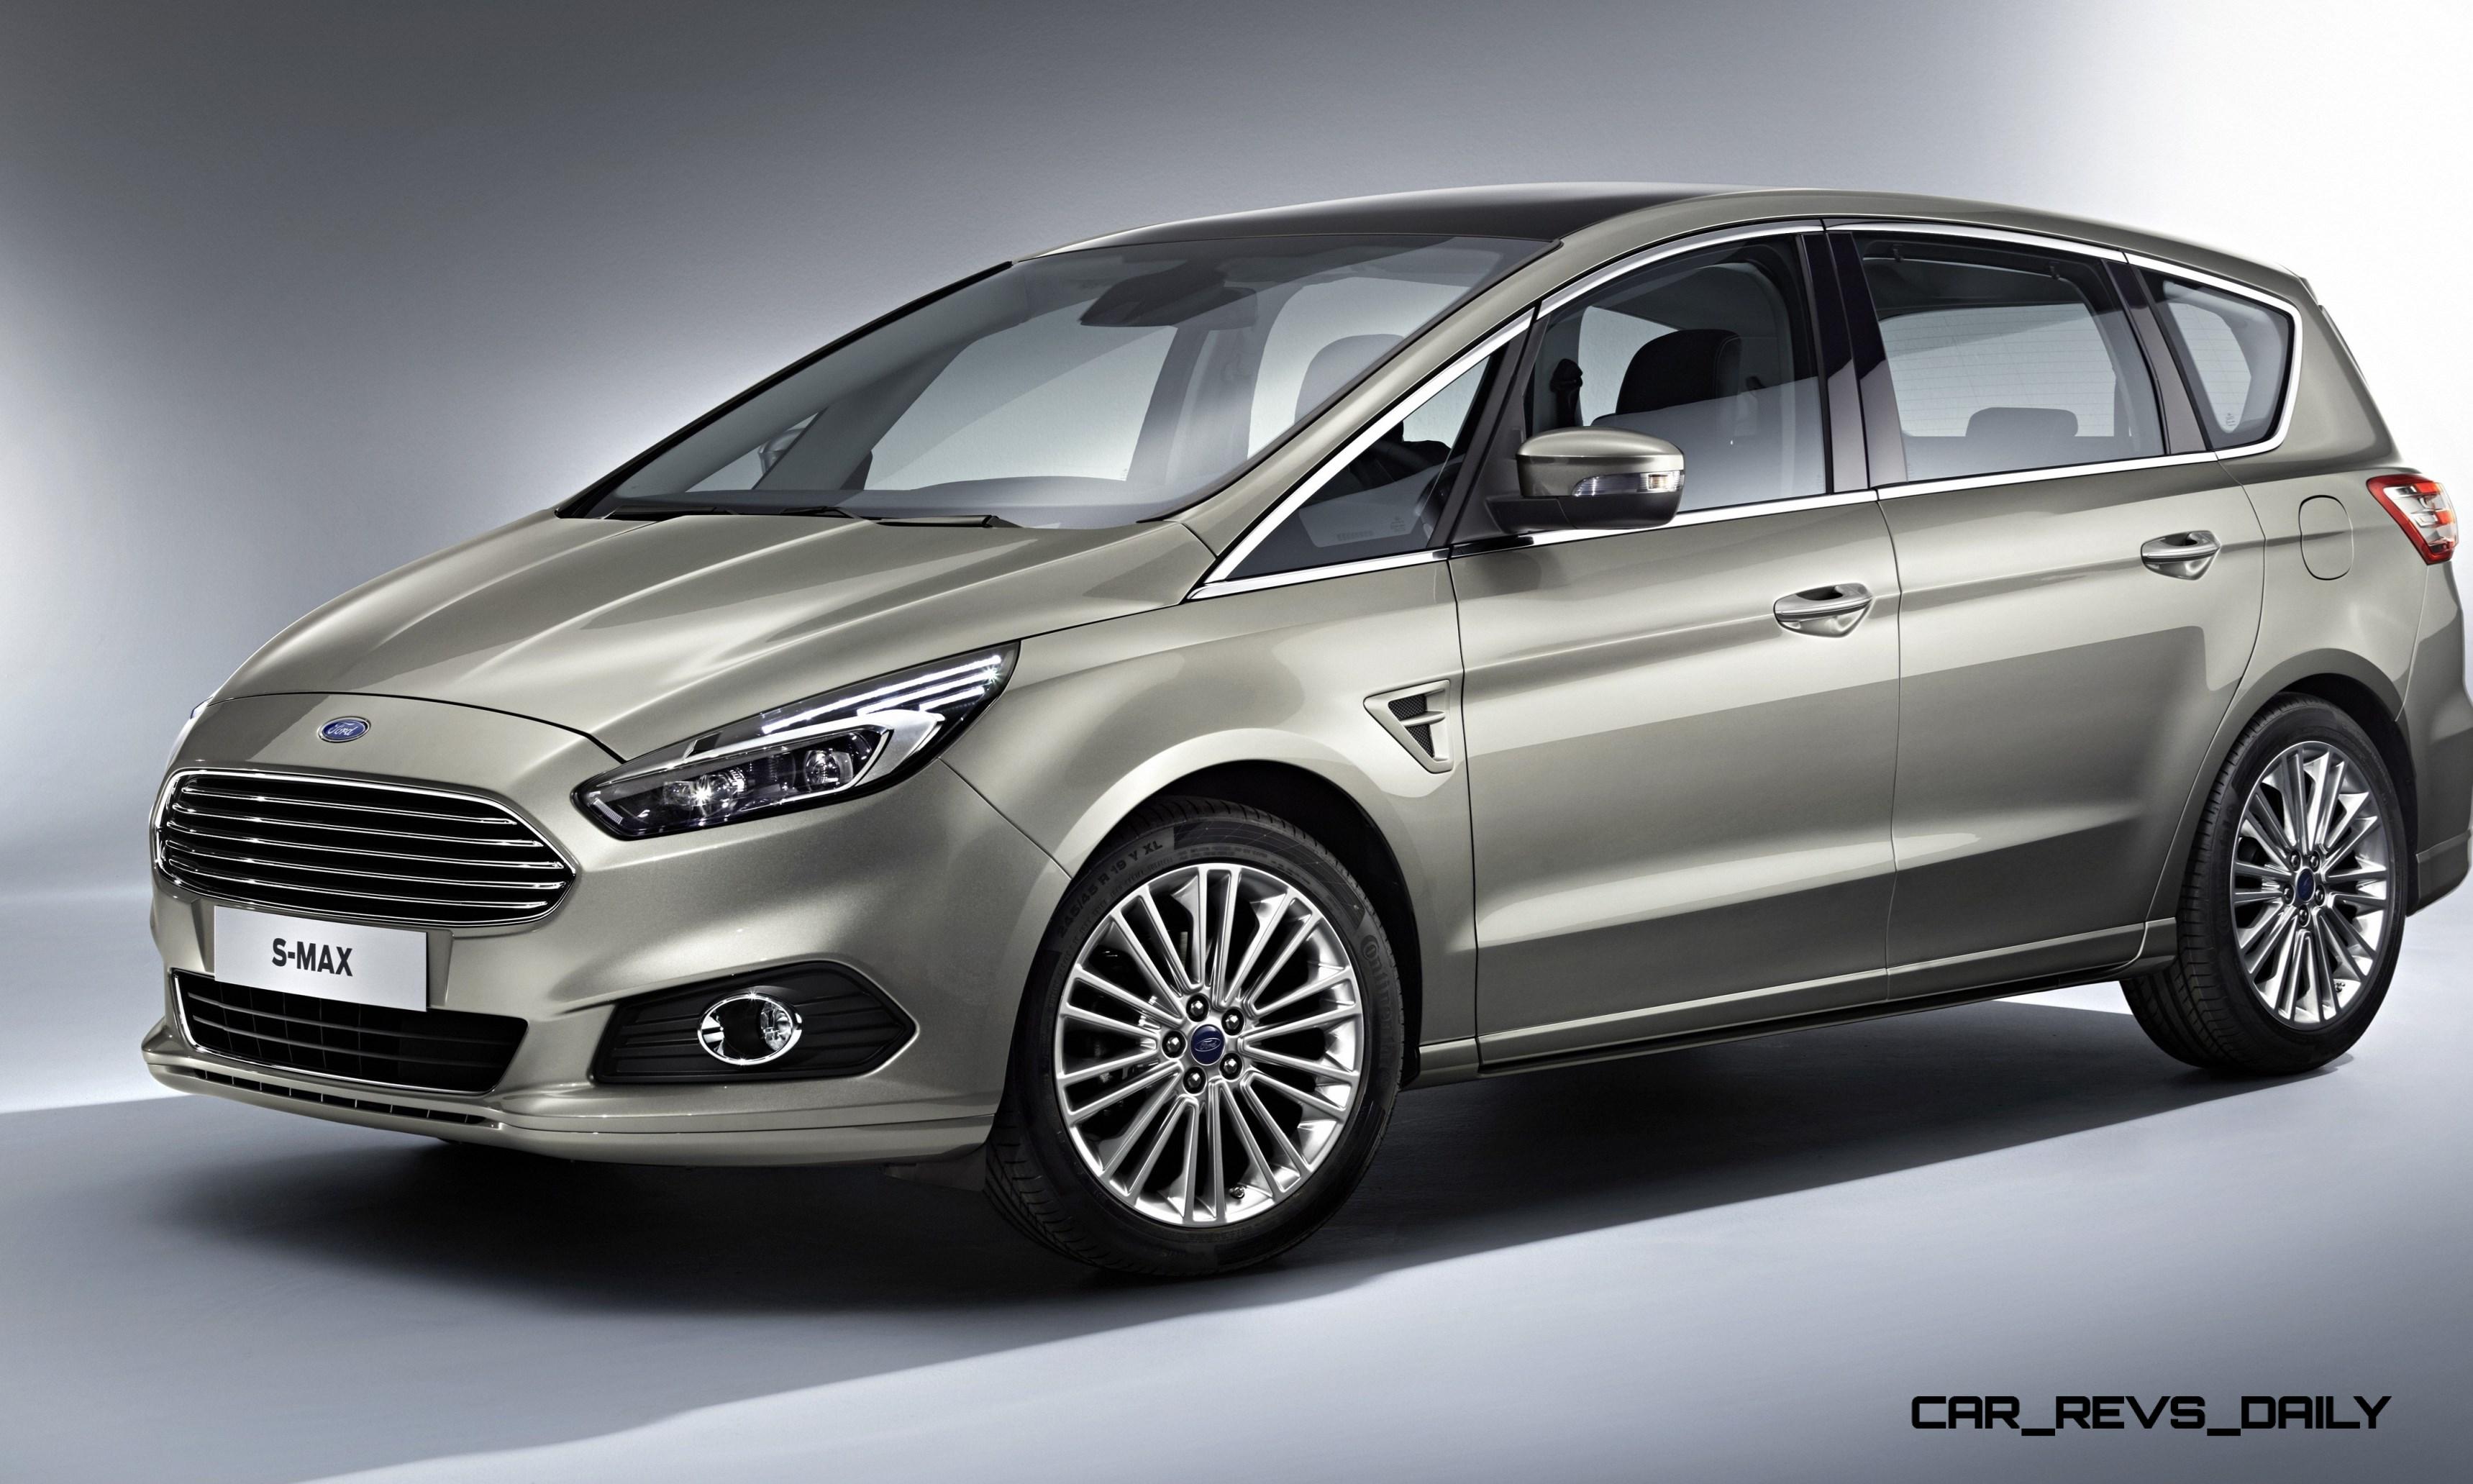 2015 Ford SMax Van Adds LED Lighting and NextGen SYNC in